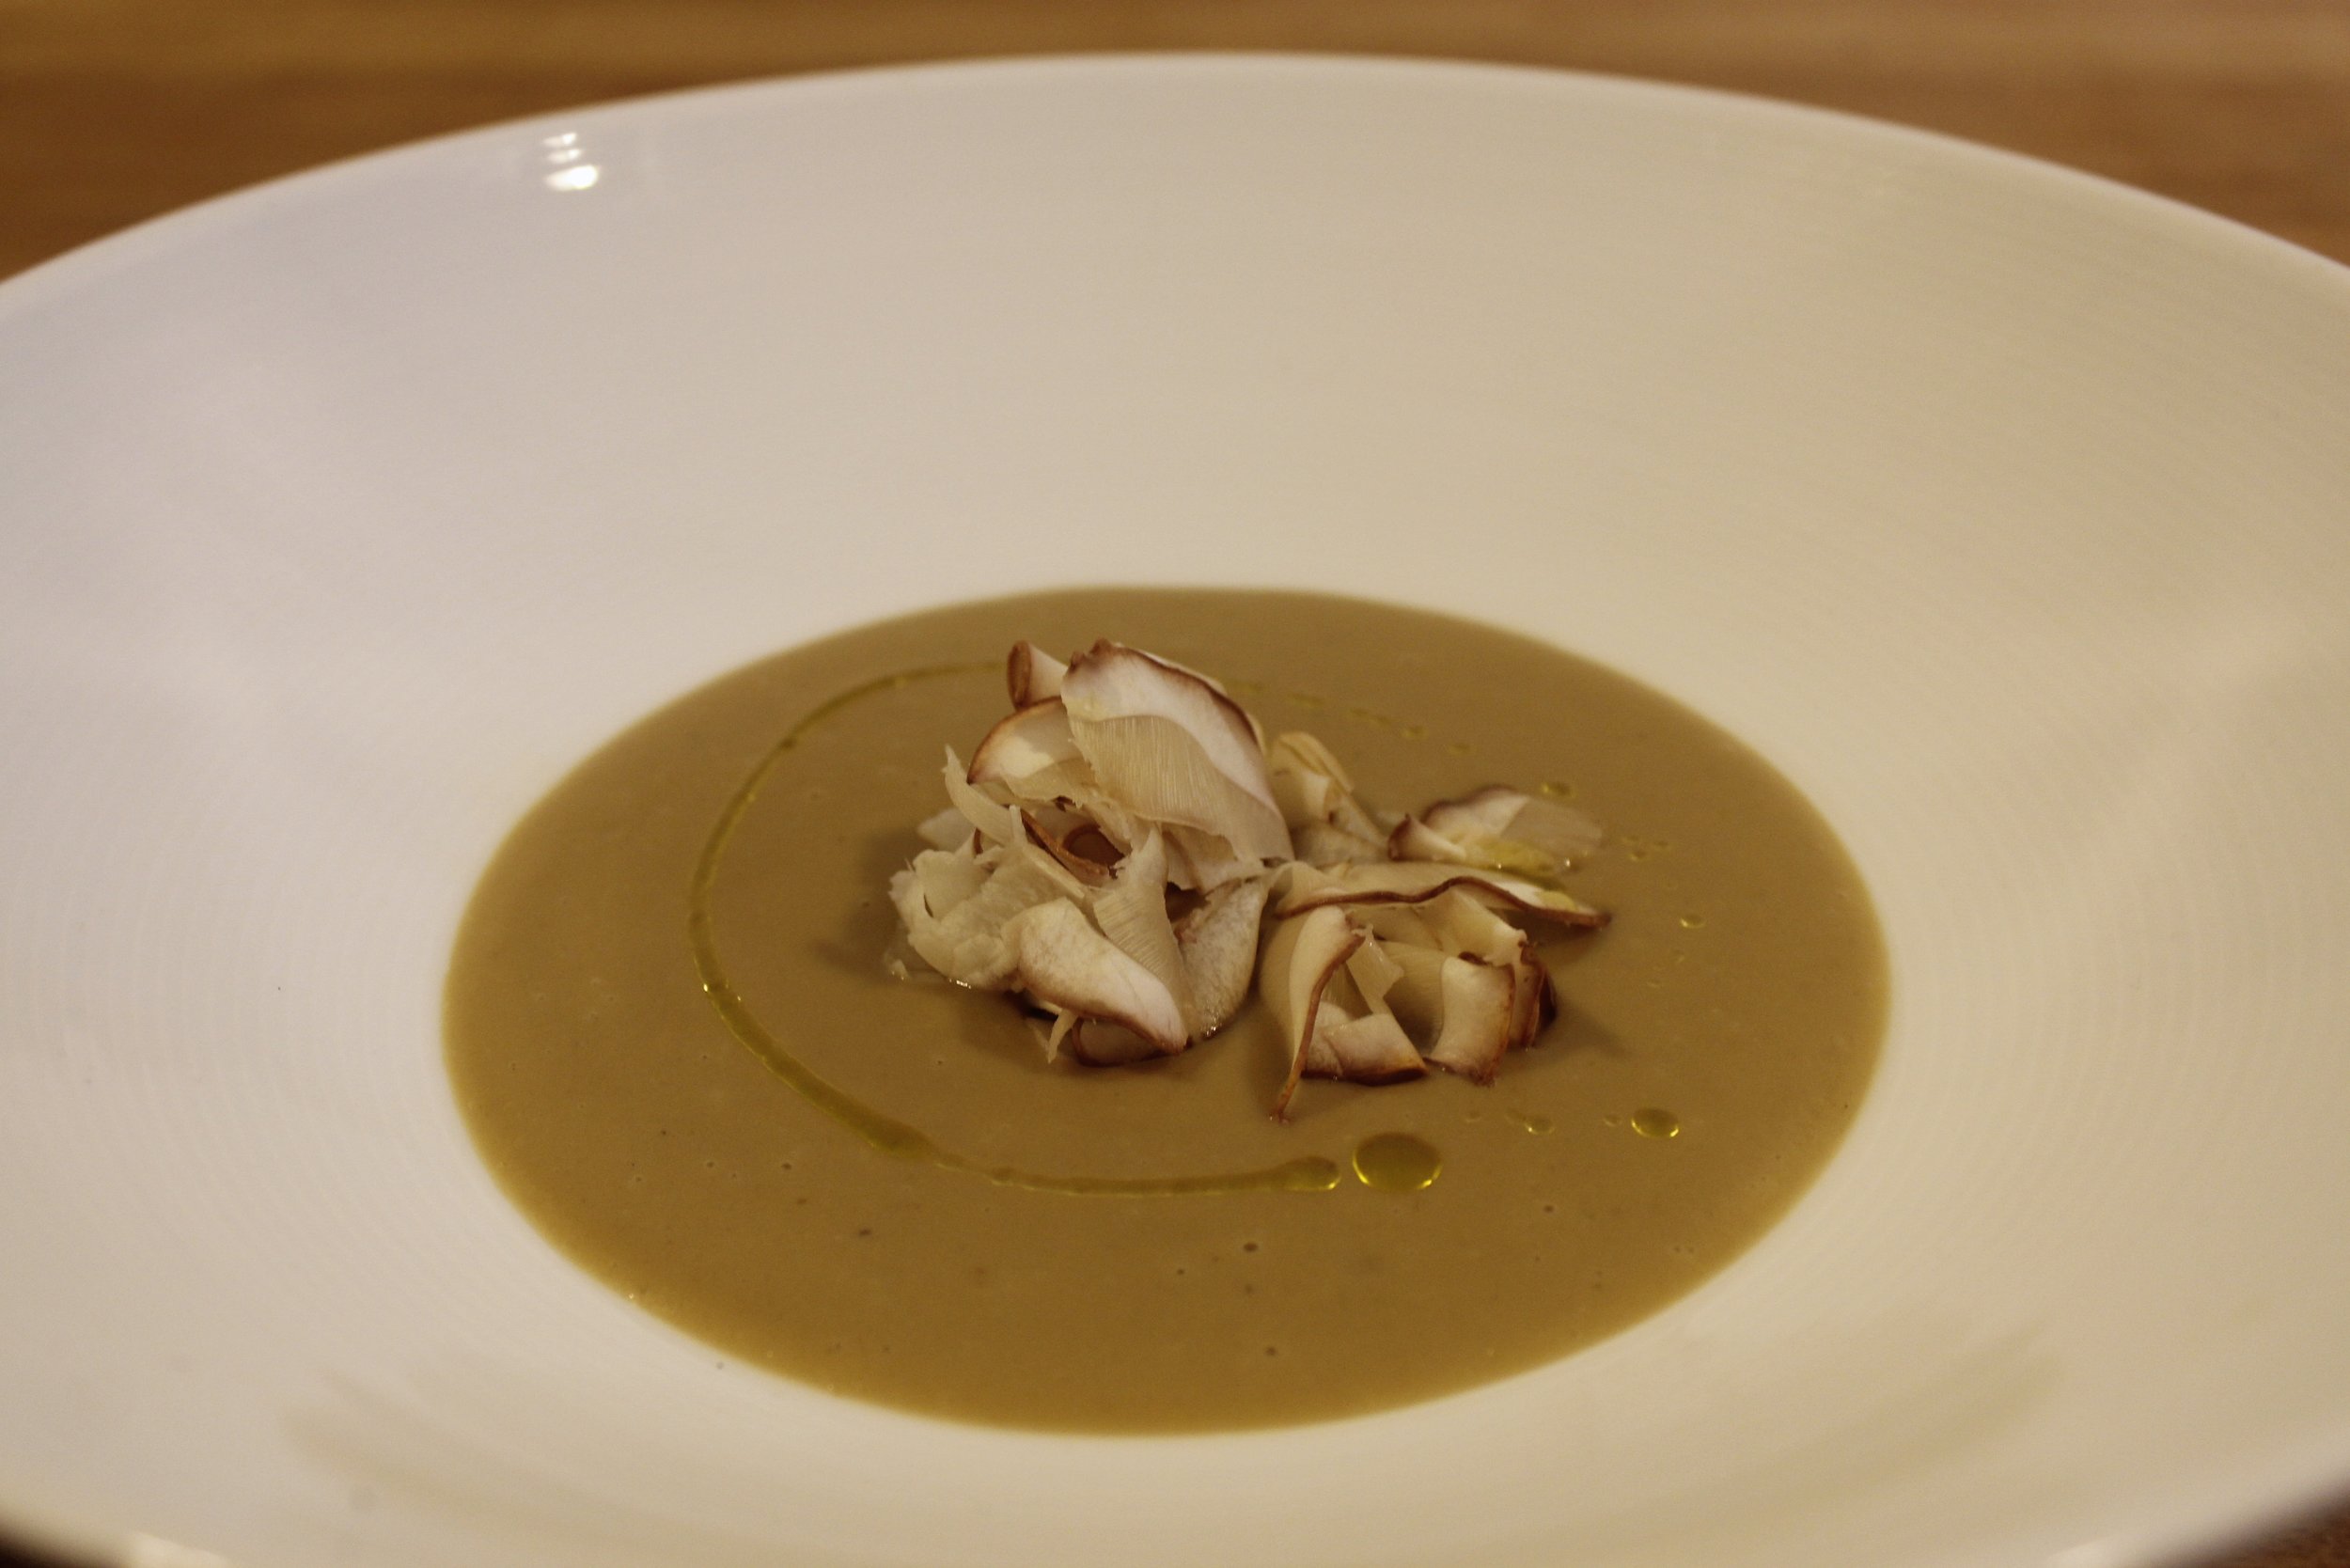  potato soup with mushroom and olive oil  